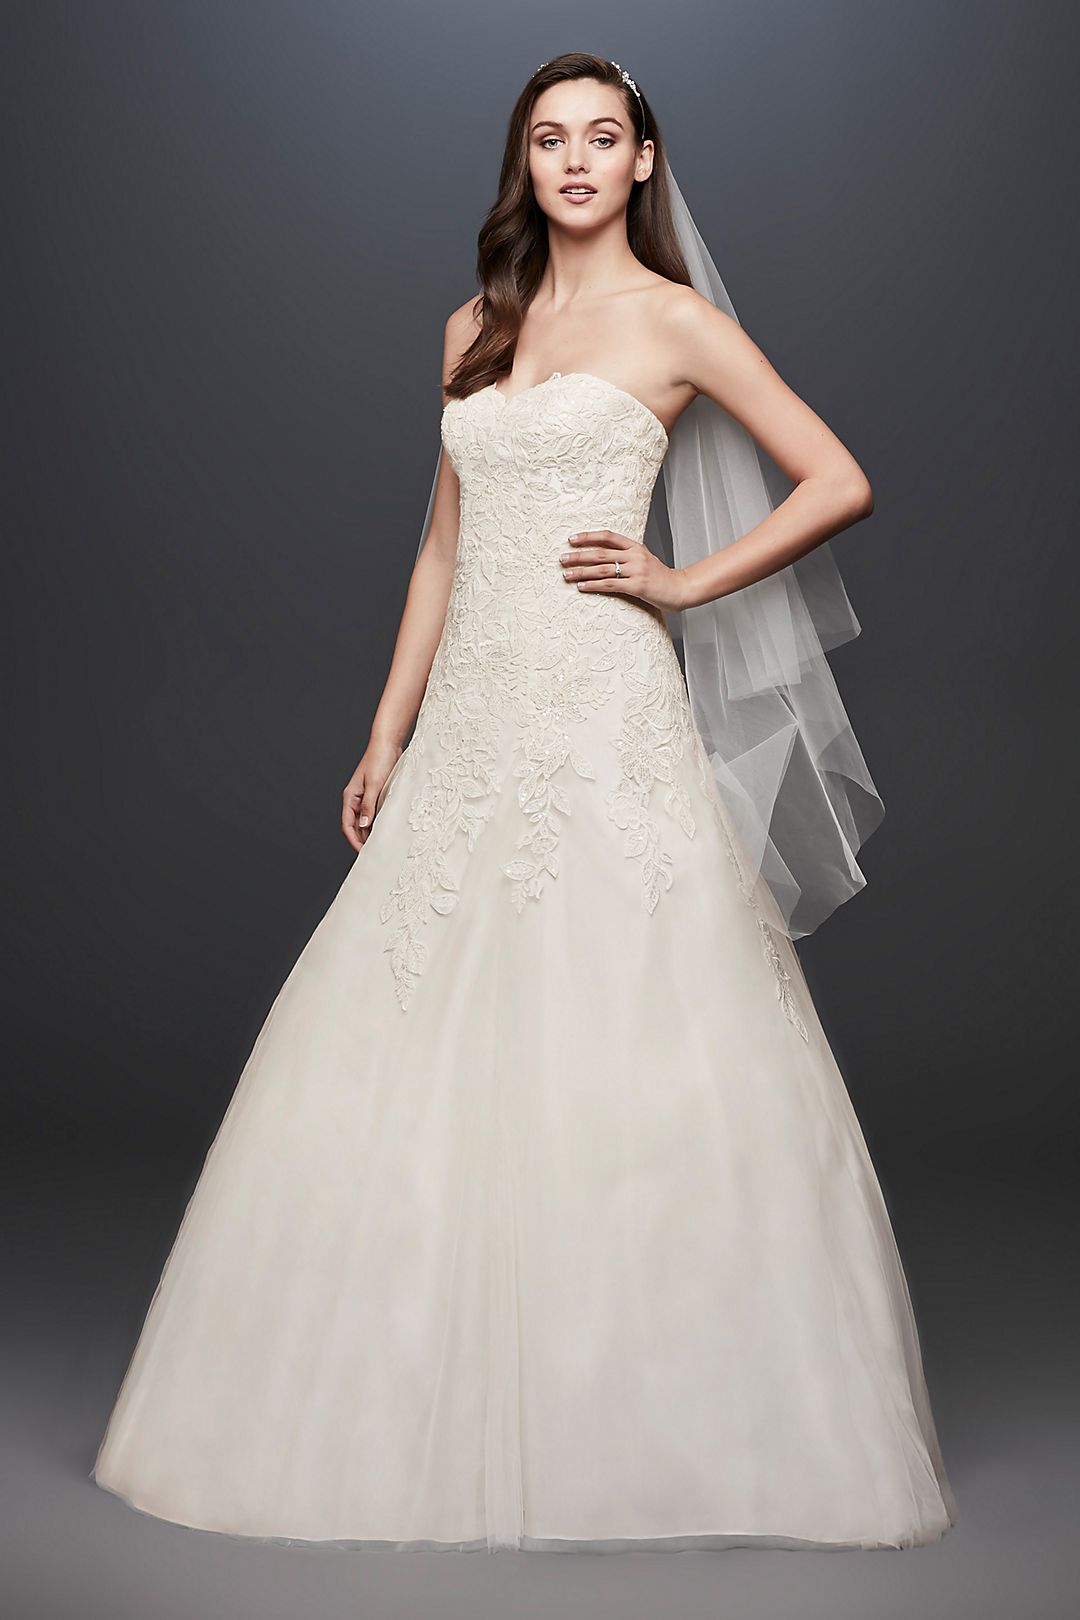 Soft Tulle Wedding Dress with Leaf Lace Applique Image 1